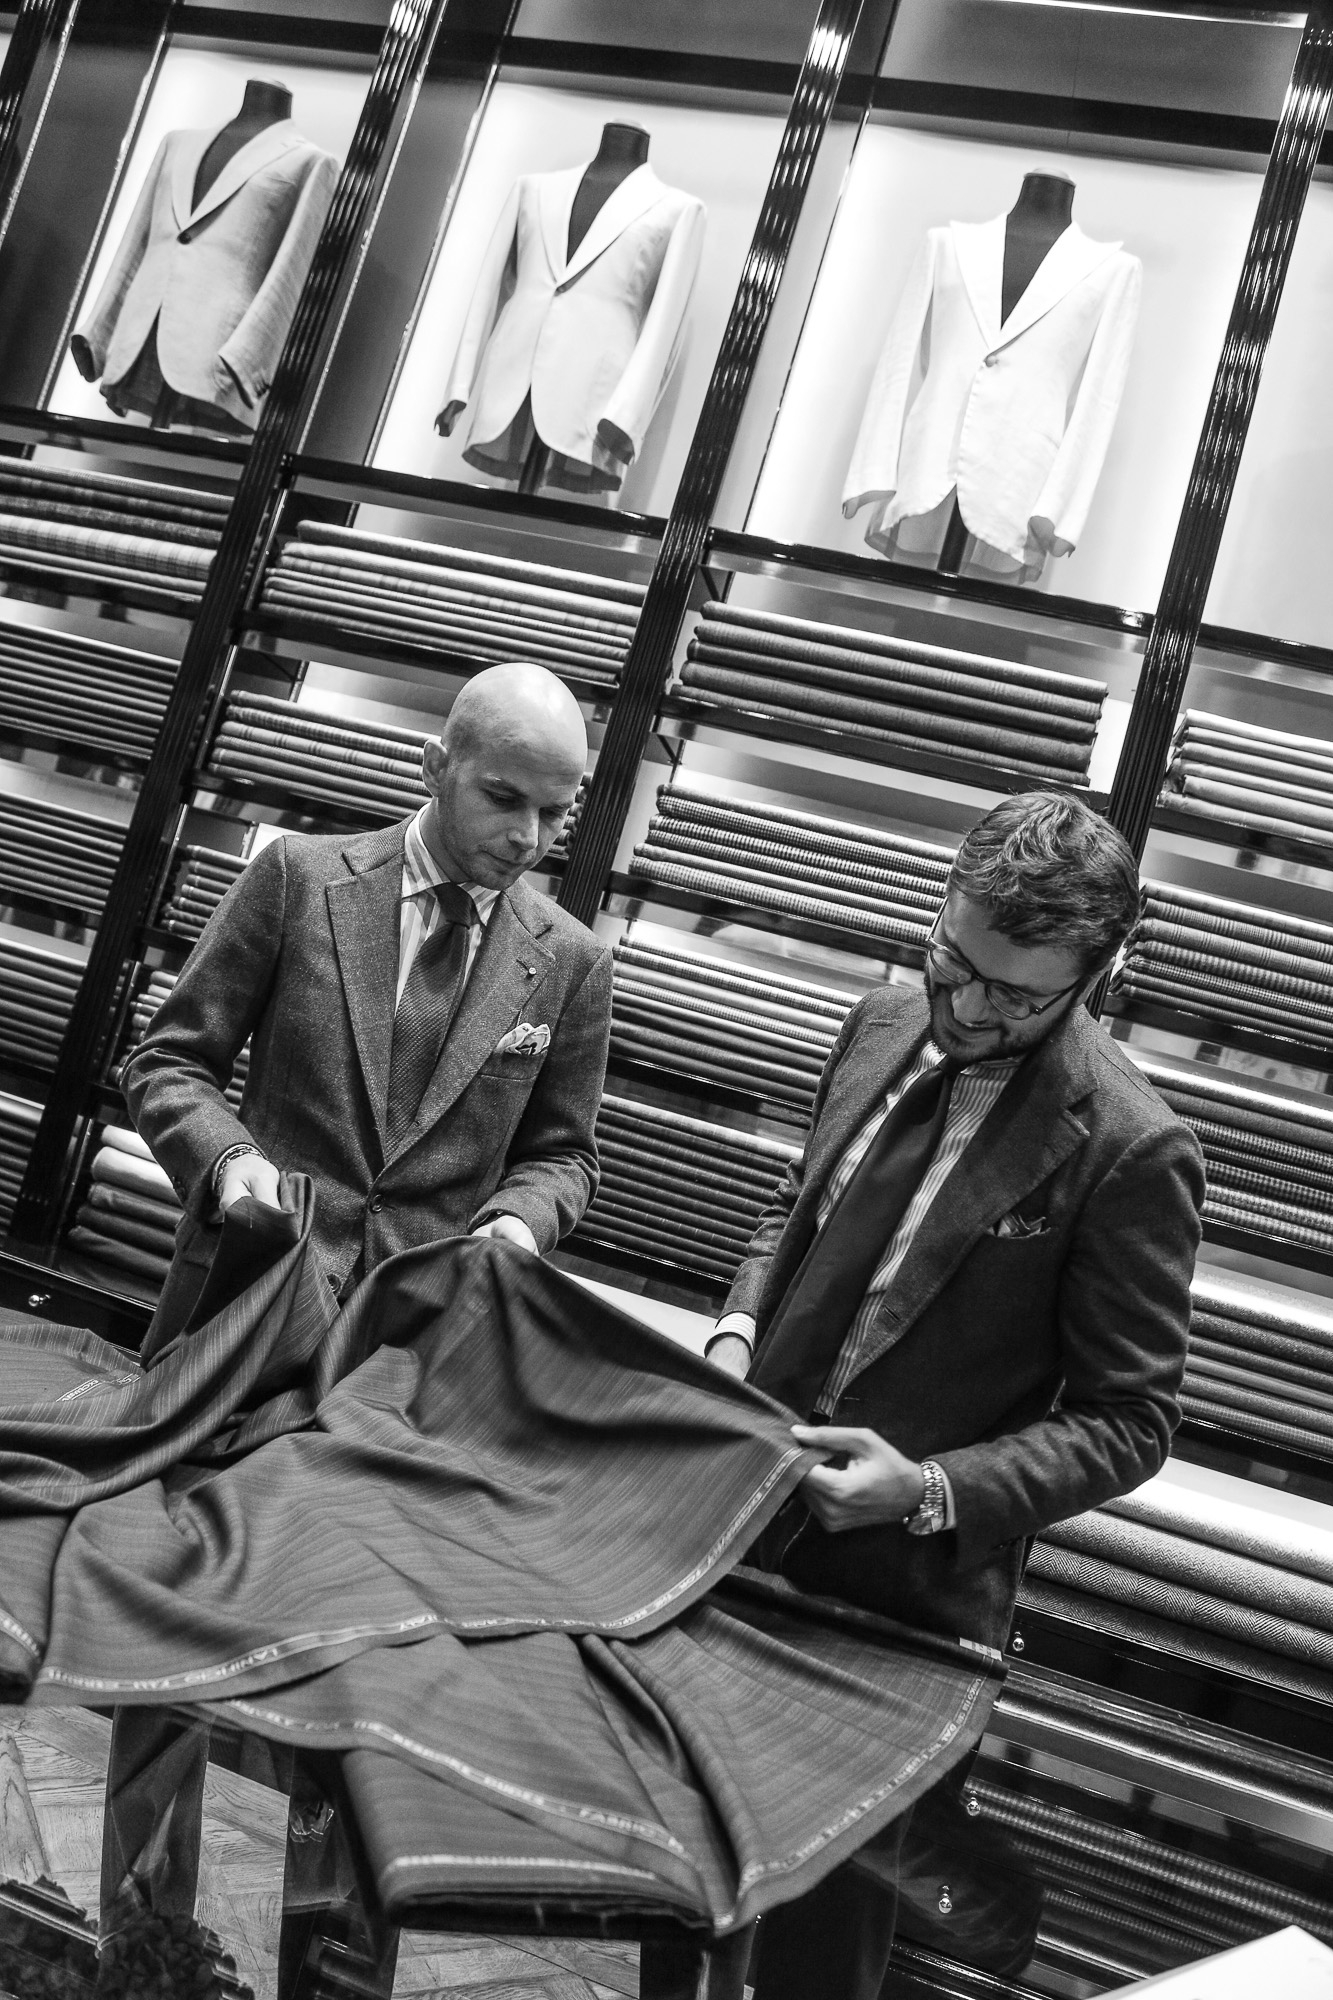 Rubinacci: Three-piece mohair suit   Measurements, fittings and the final result